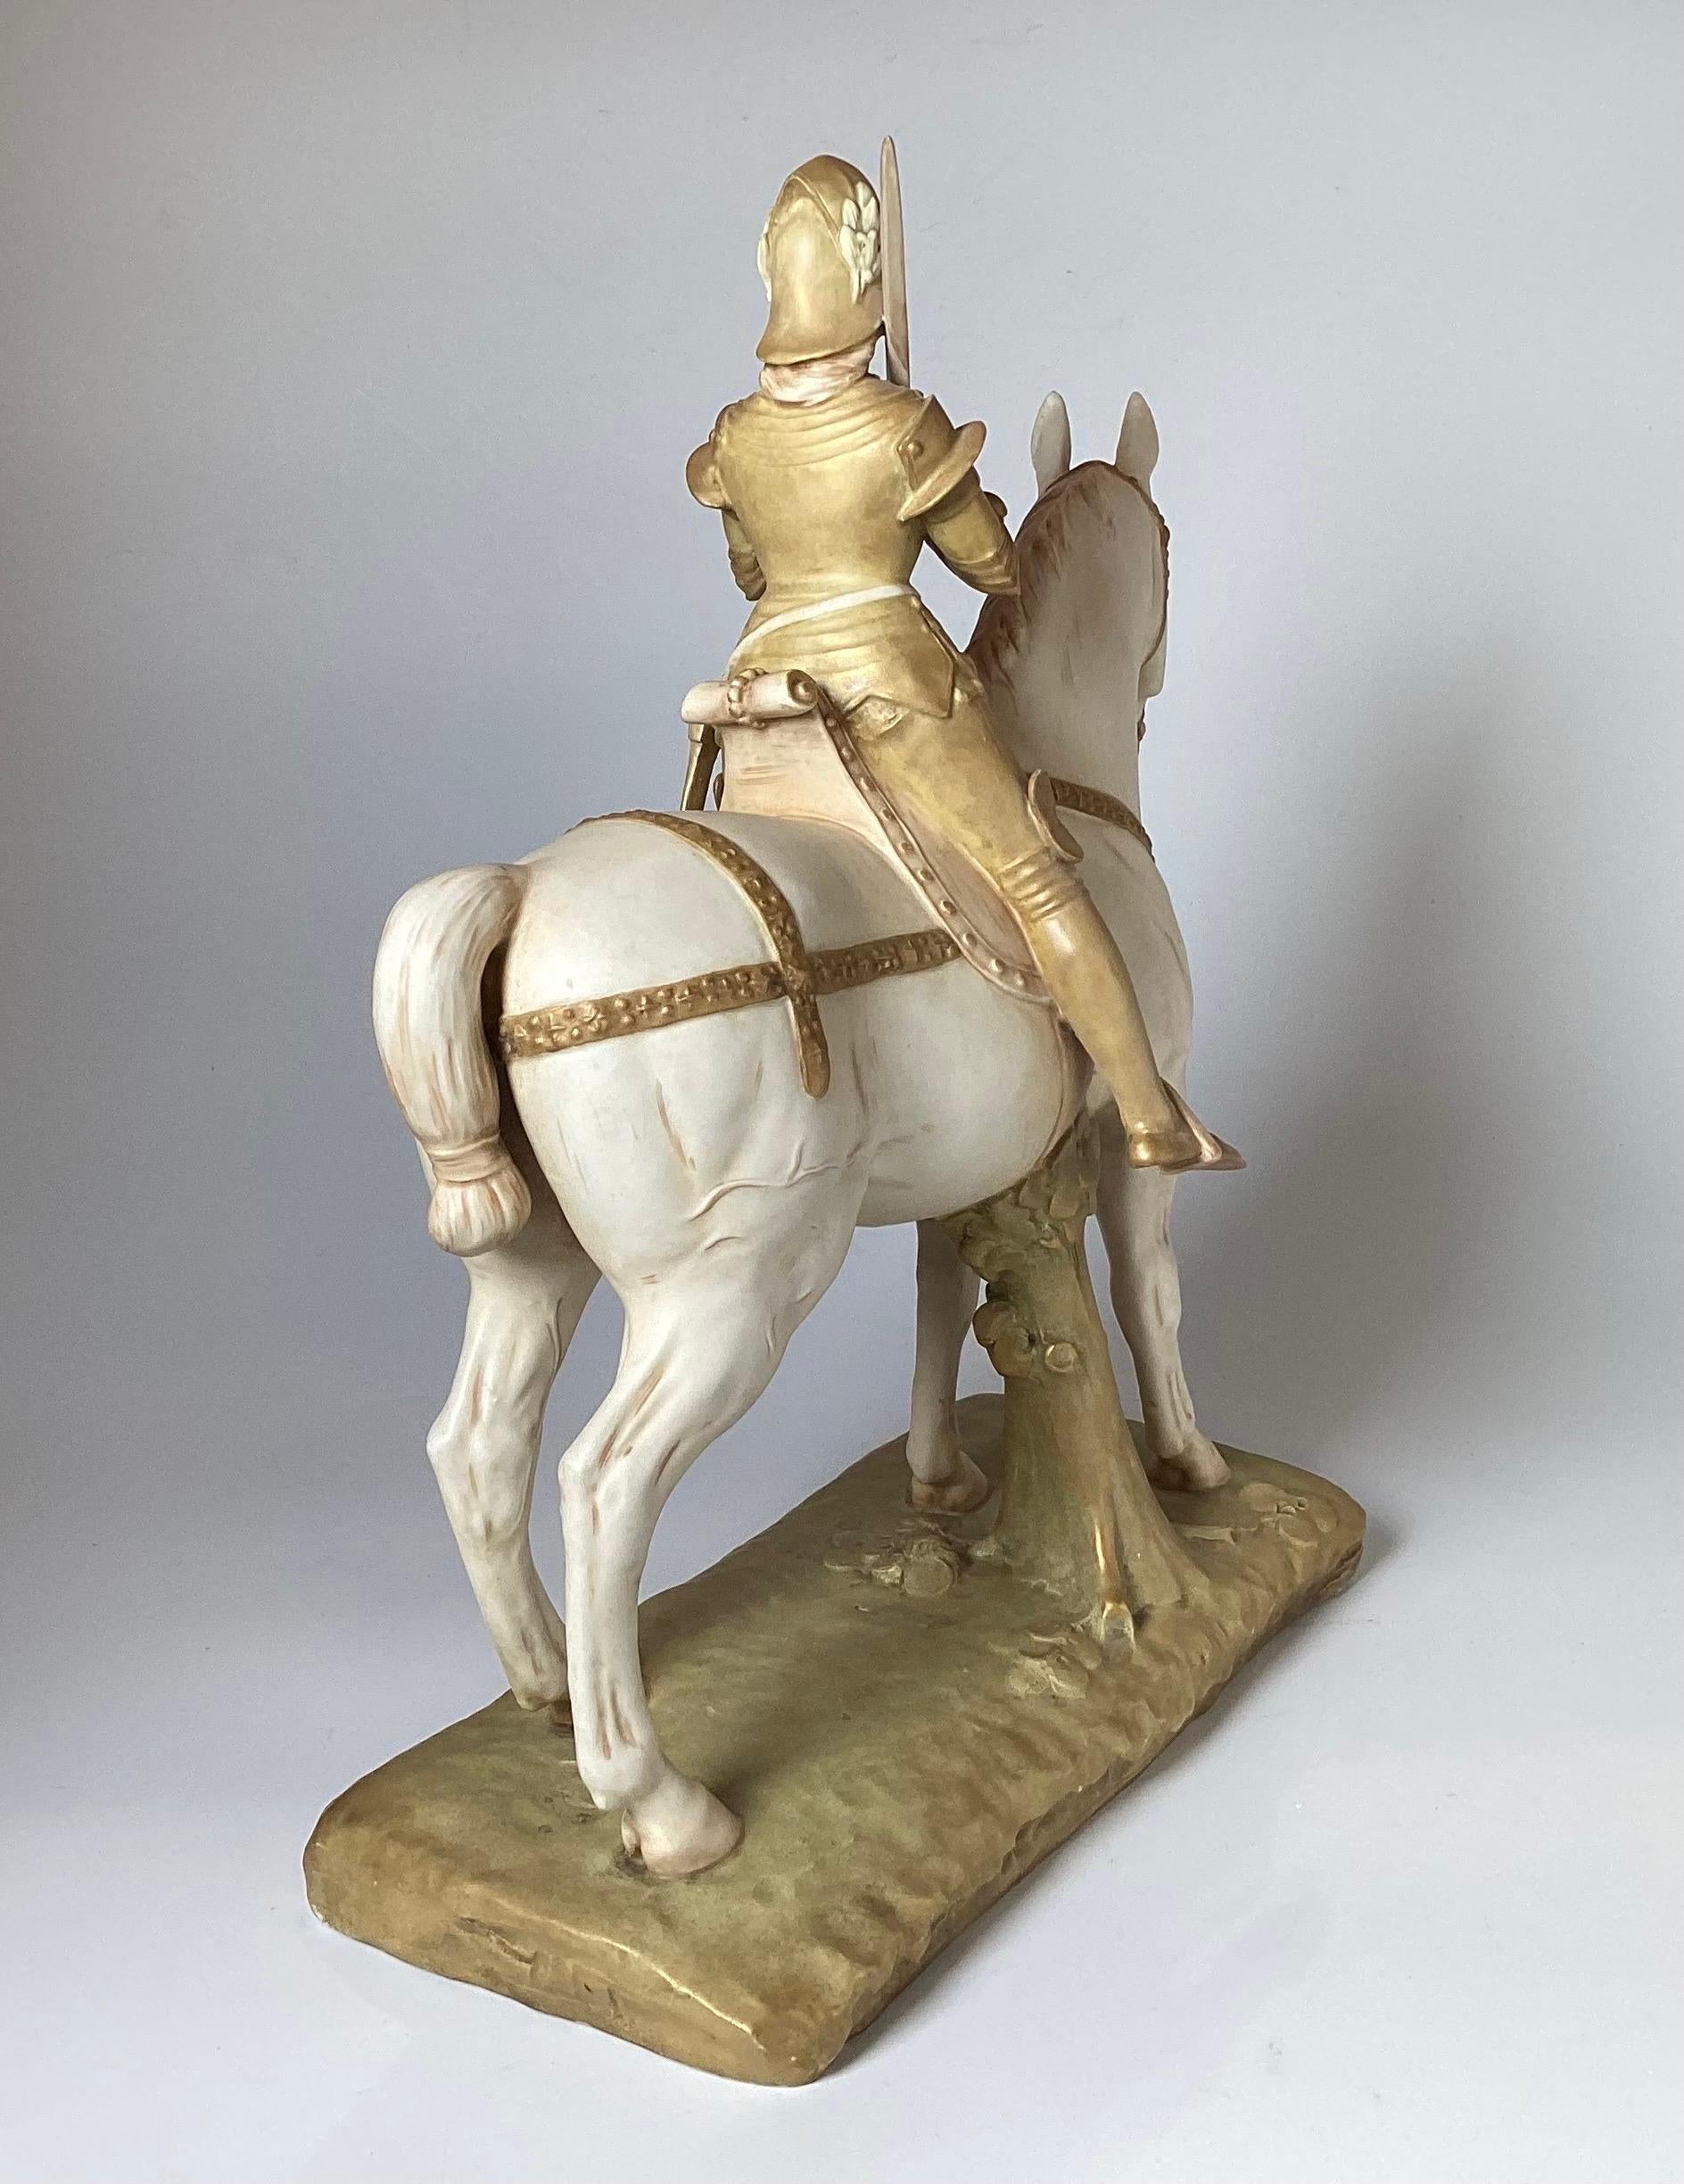 Hand-Painted Unique Hand Painted Porcelain Figure of Joan of Arc Riding a Horse For Sale